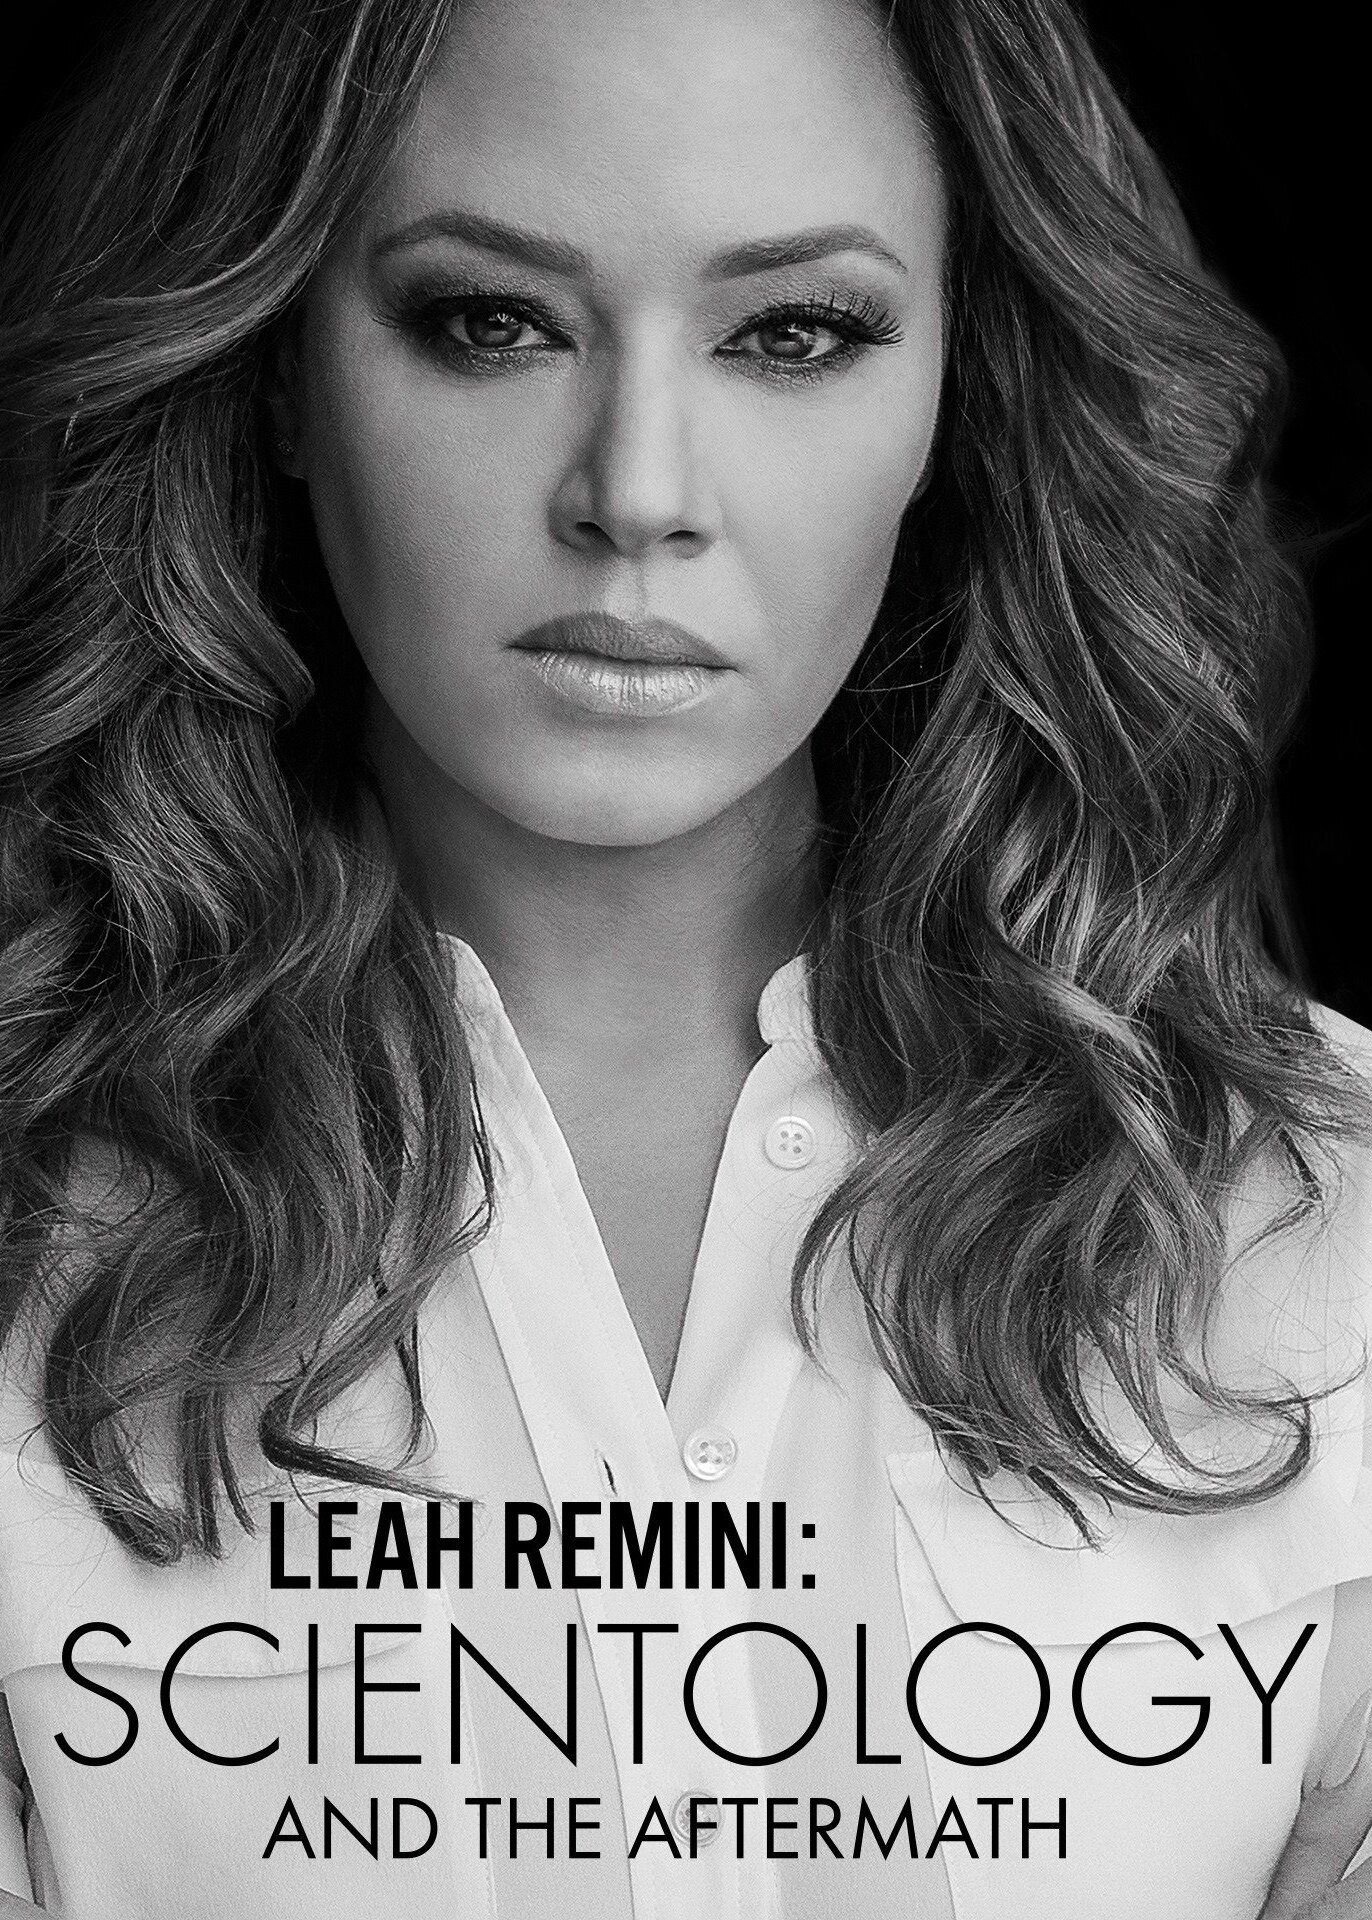 Leah Remini: Scientology and the Aftermath ne zaman